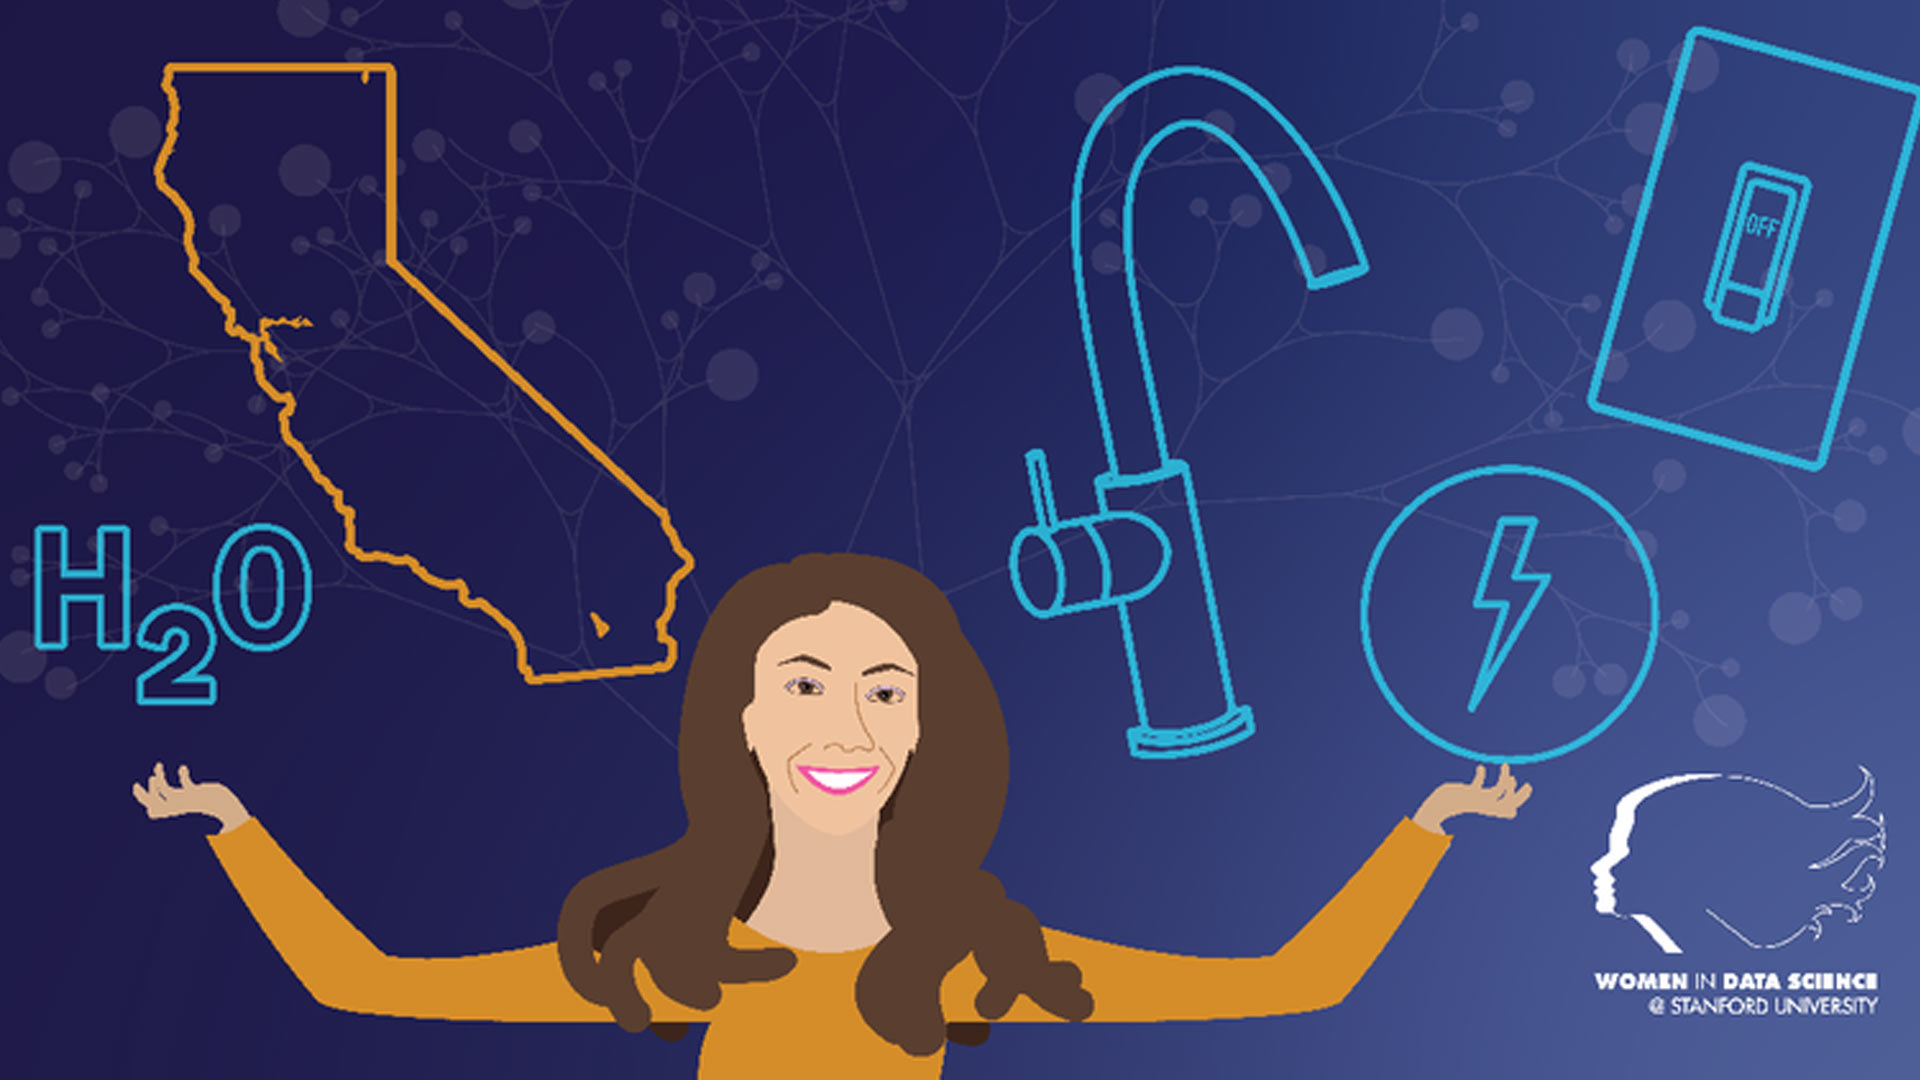 Illustration of Newsha Ajami on a background with WiDS branded icons